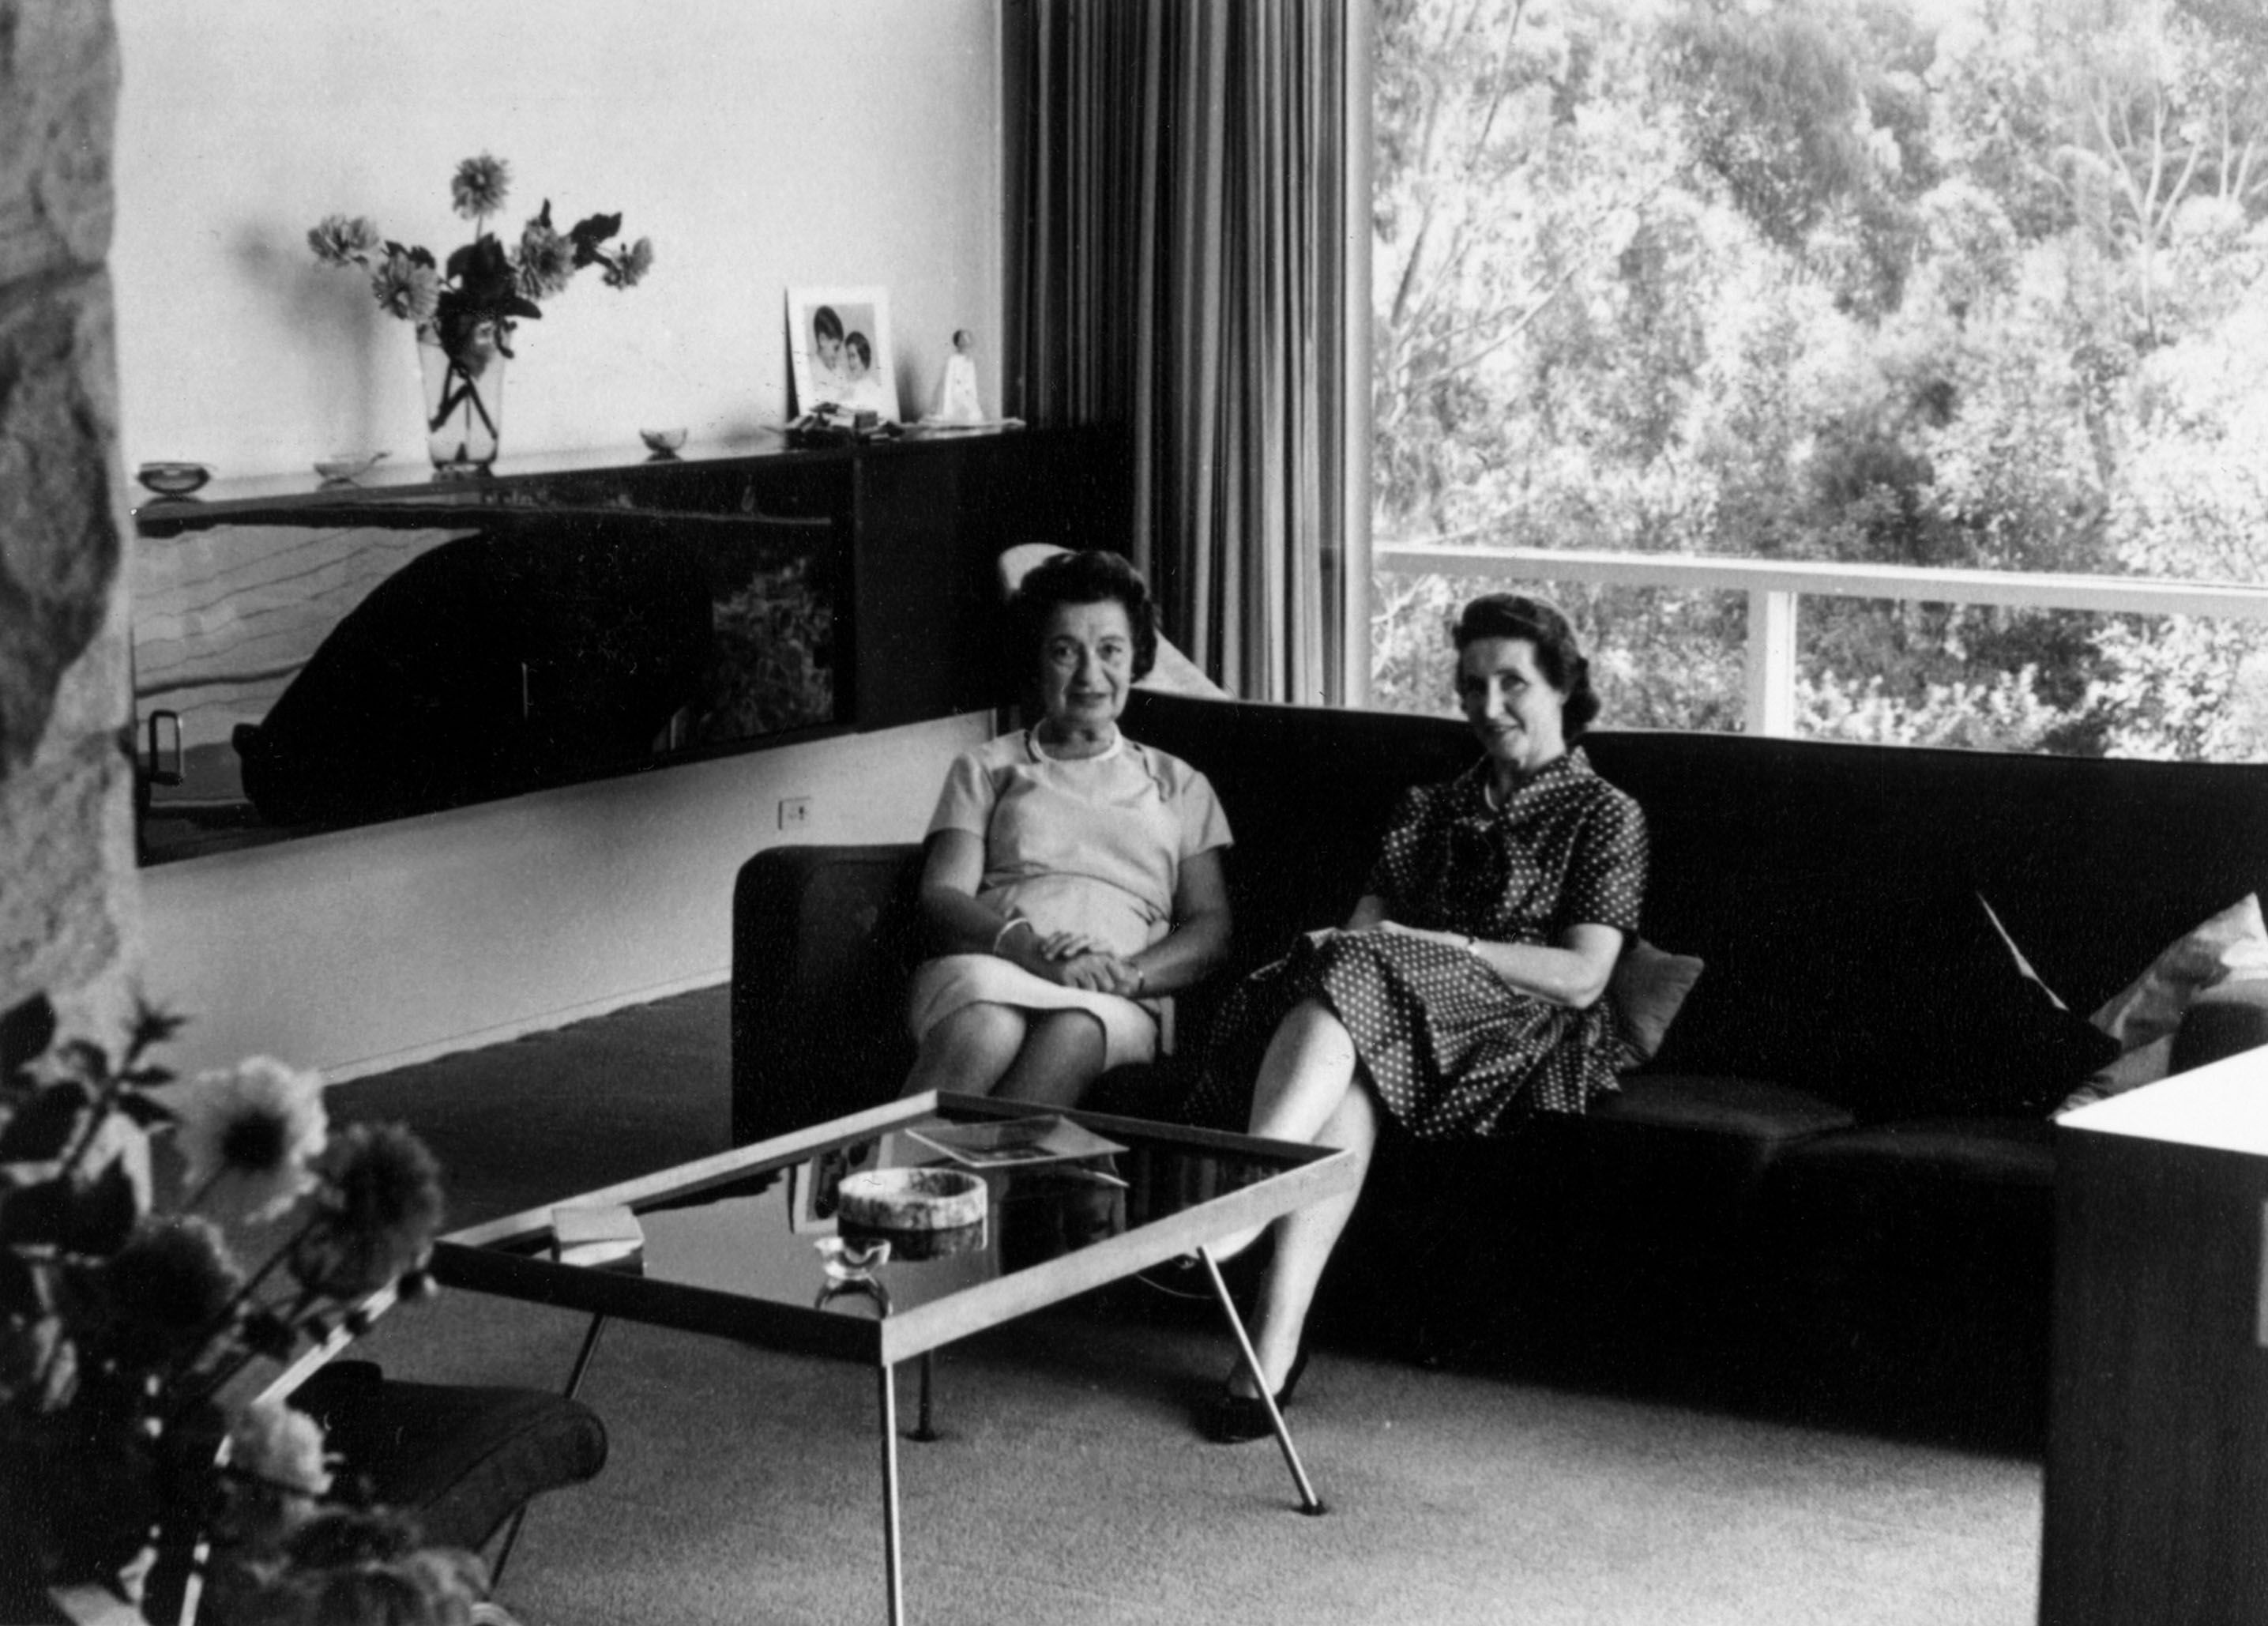 Black and white image of two woman sitting on a couch